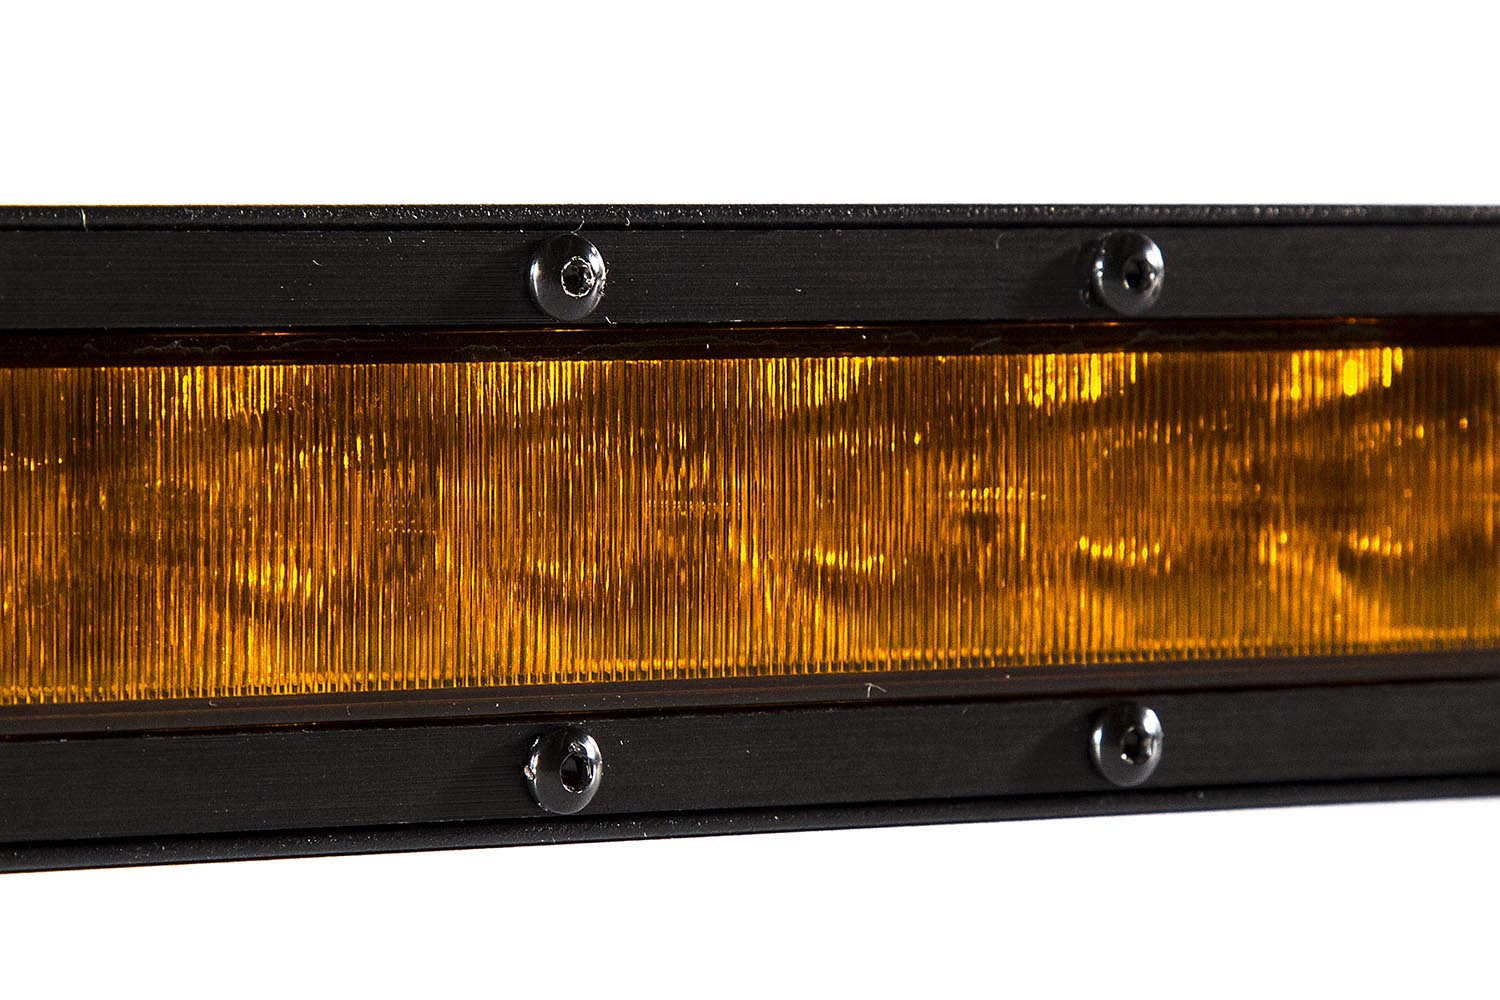 12 Inch LED Light Bar  Single Row Straight Amber Driving Pair Stage Series Diode Dynamics